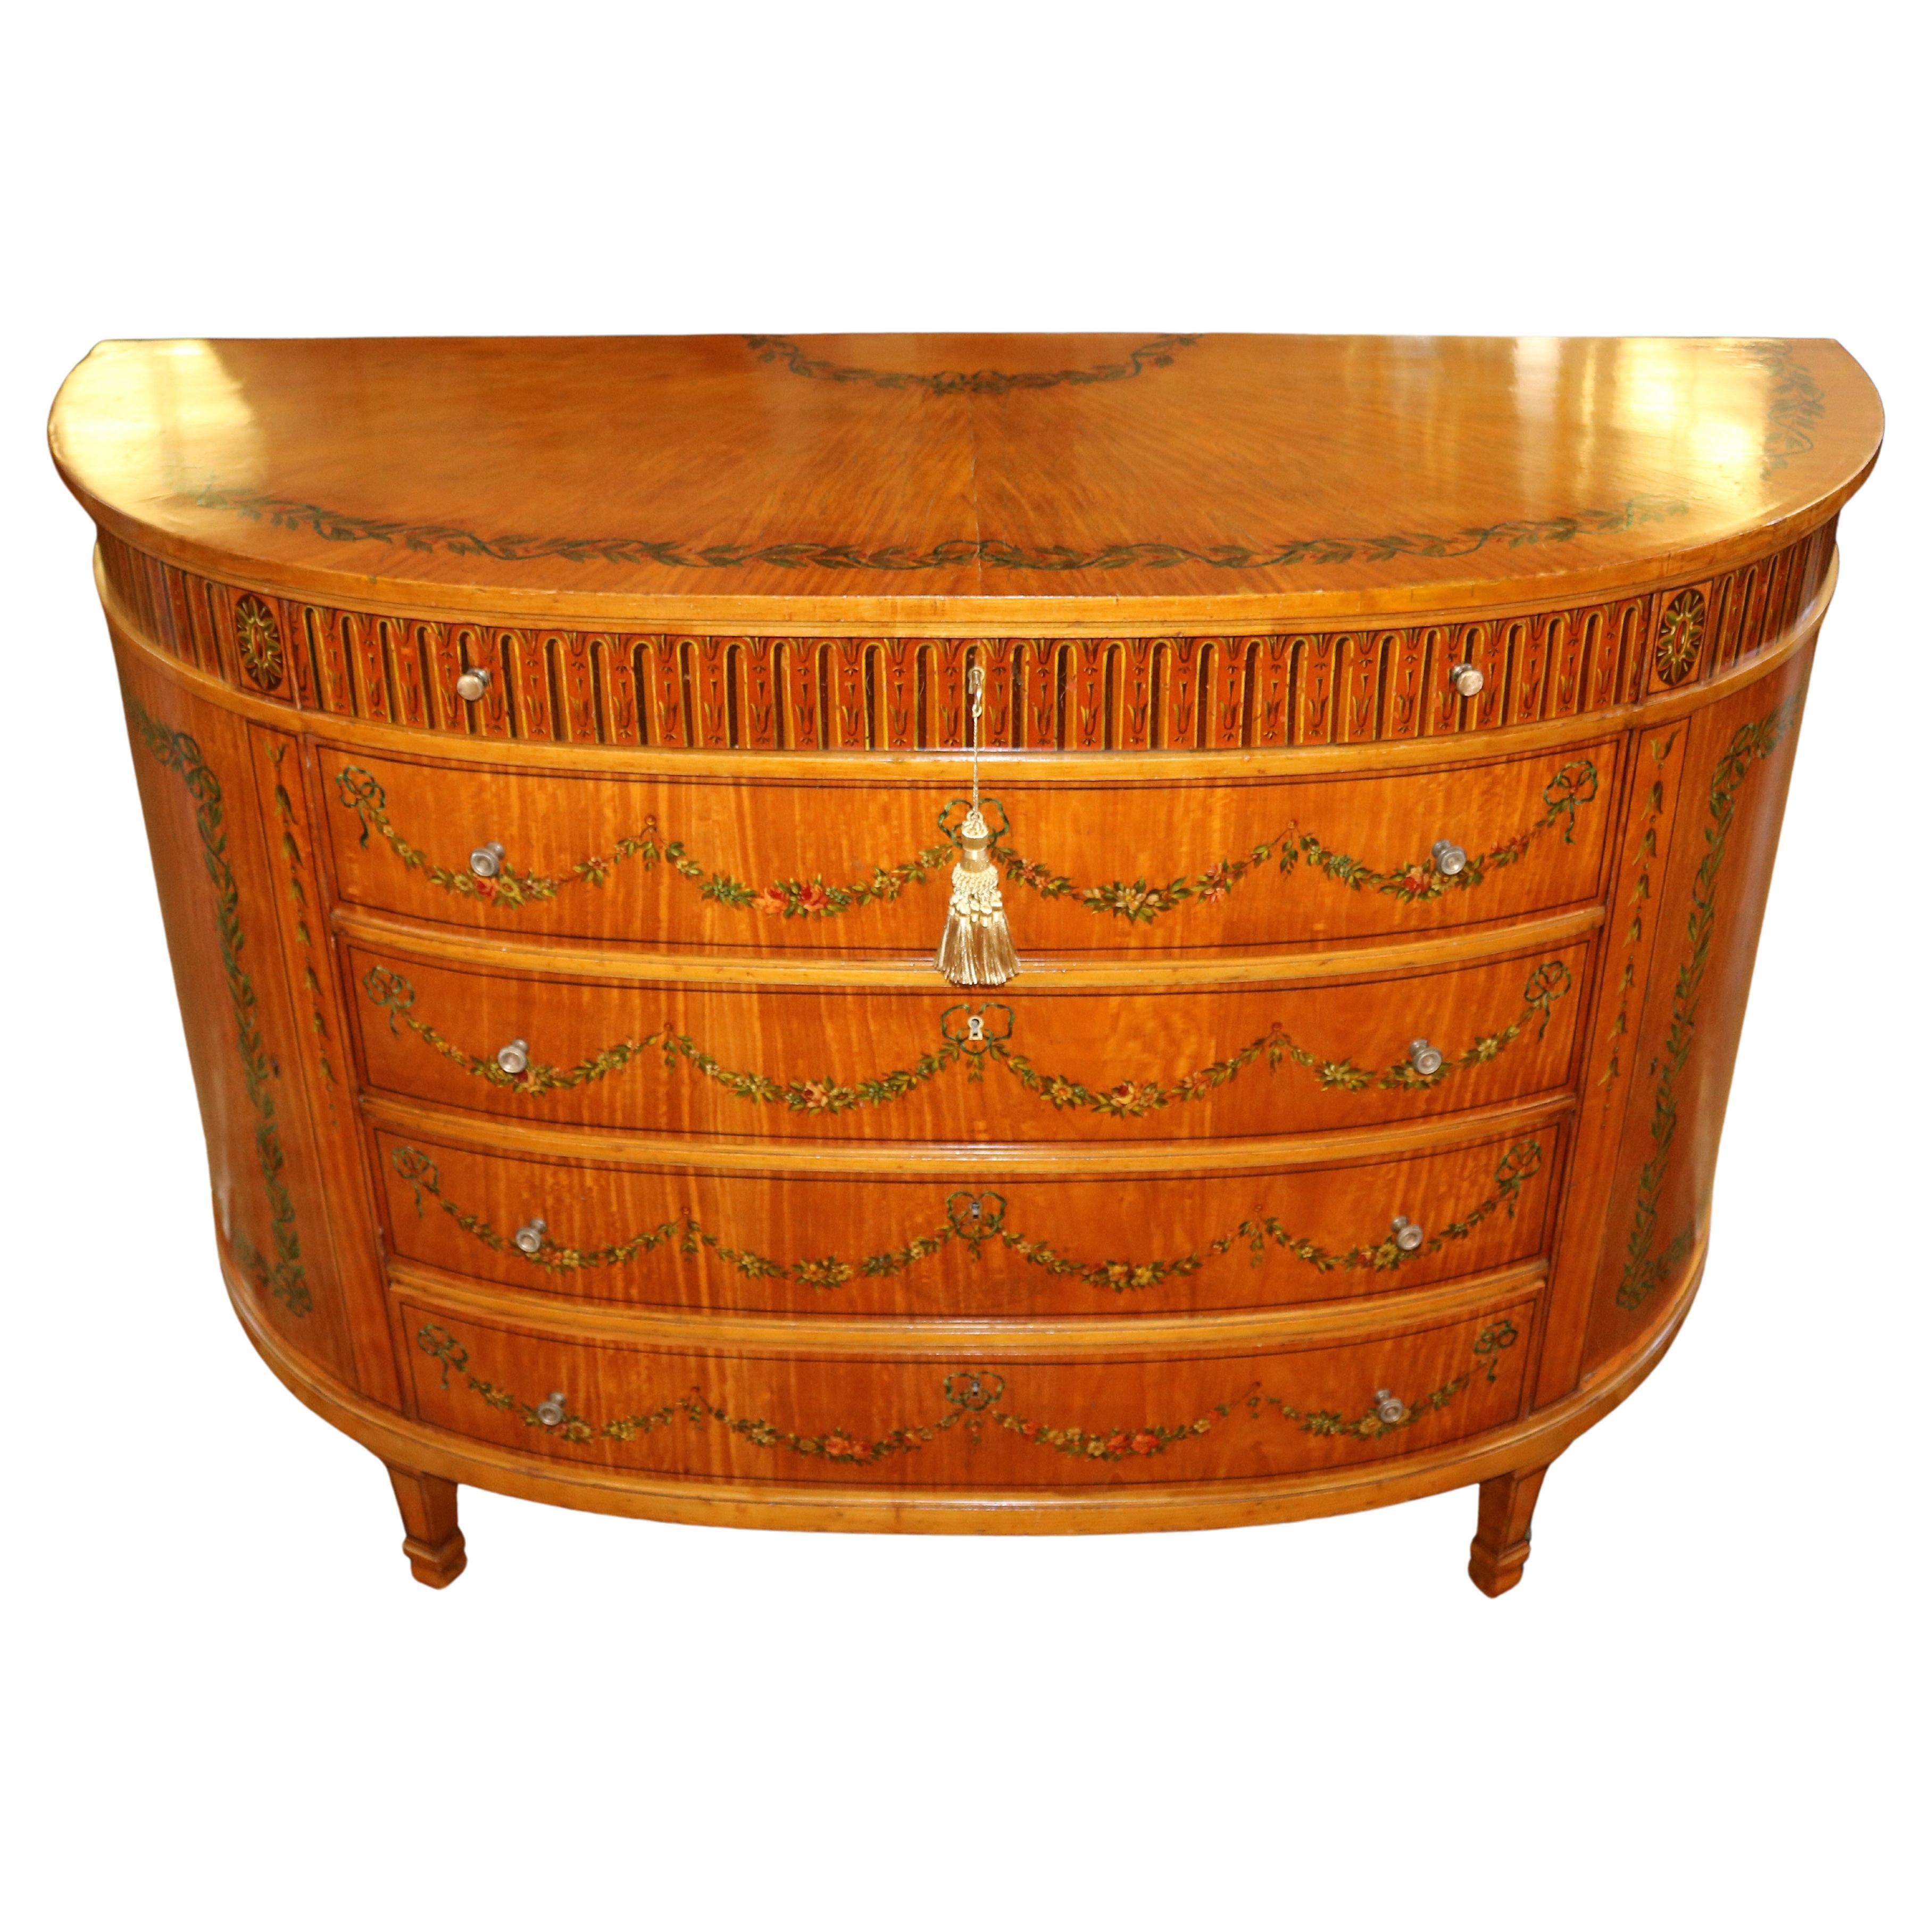 F.O Schmidt Vienna Adams Style Satinwood Paint Decorated Dresser Commode 1910